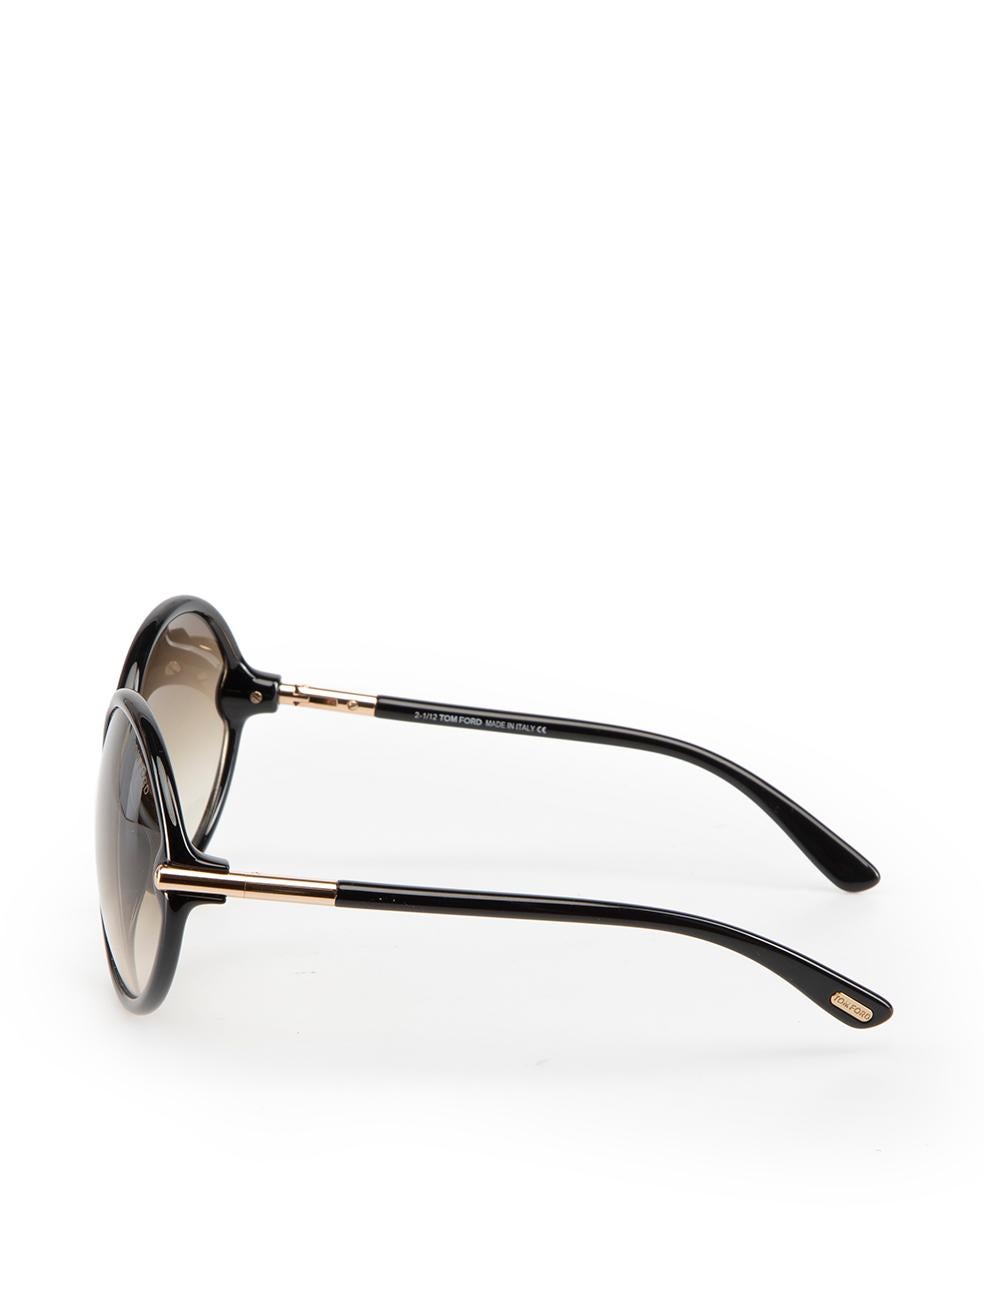 Tom Ford Black Round Oversized Rita Sunglasses In Excellent Condition In London, GB